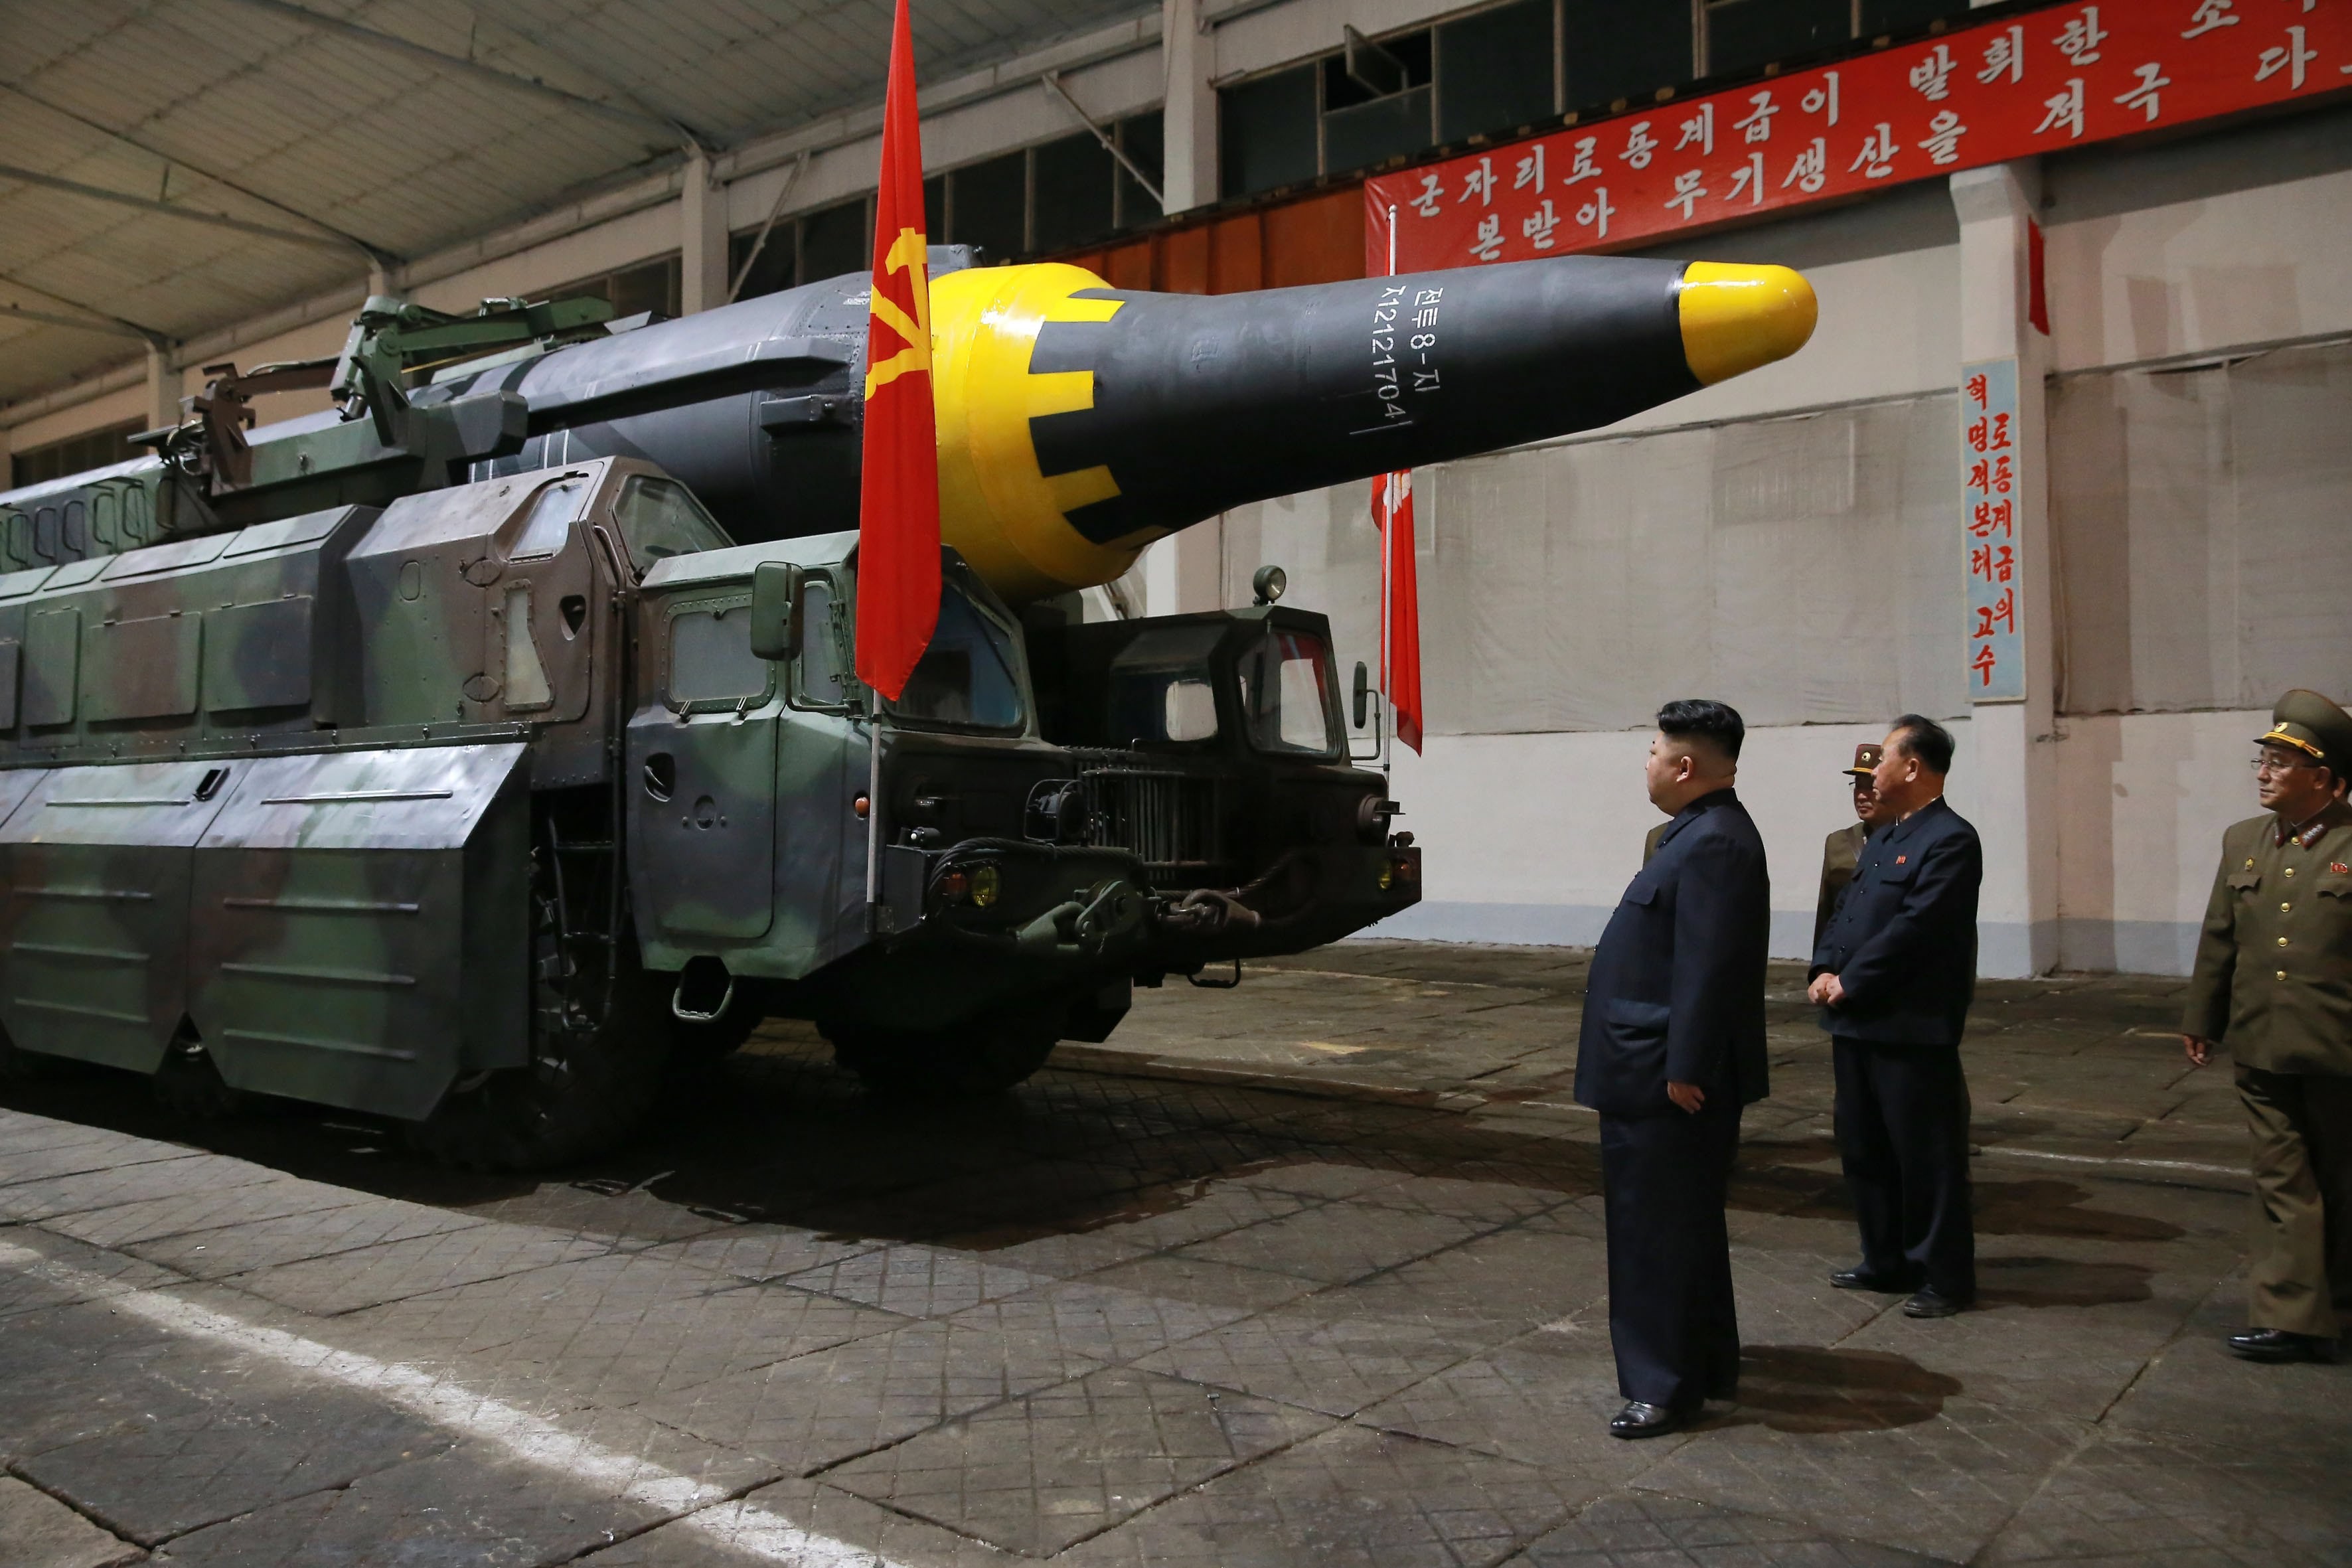 North Korean leader Kim Jong-un inspects a missile after Pyongyang said it had successfully test-fired a new ground-to-ground medium long-range strategic ballistic rocket on May 14. Photo: EPA